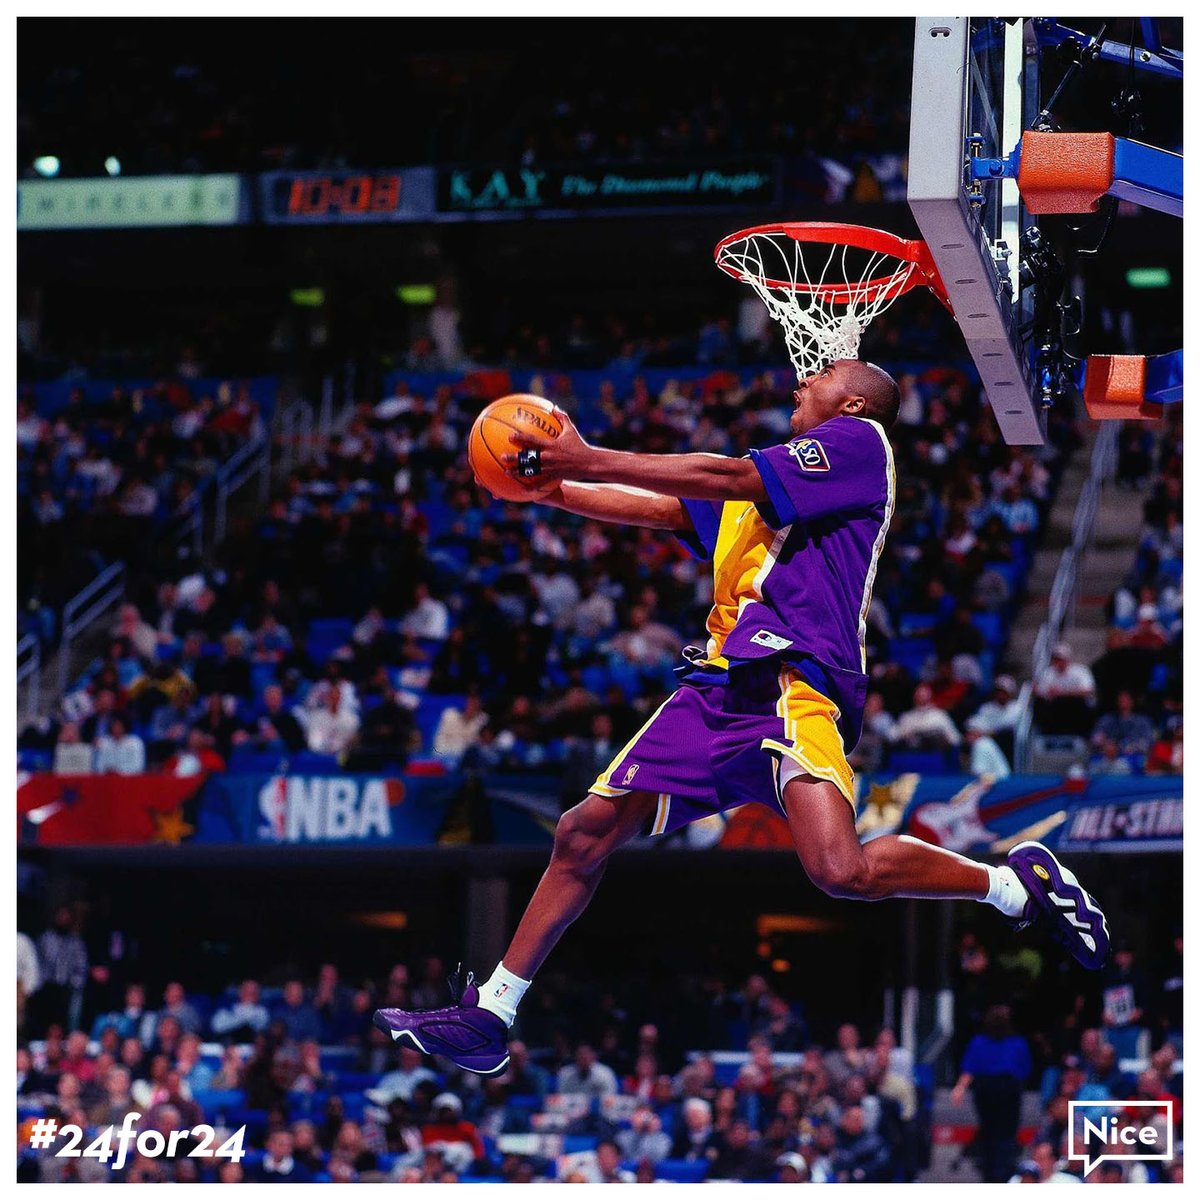 1997 KOBE BRYANT Los Angeles Lakers SLAM DUNK CHAMPION 8x10 Photo ROOKIE PICTURE 